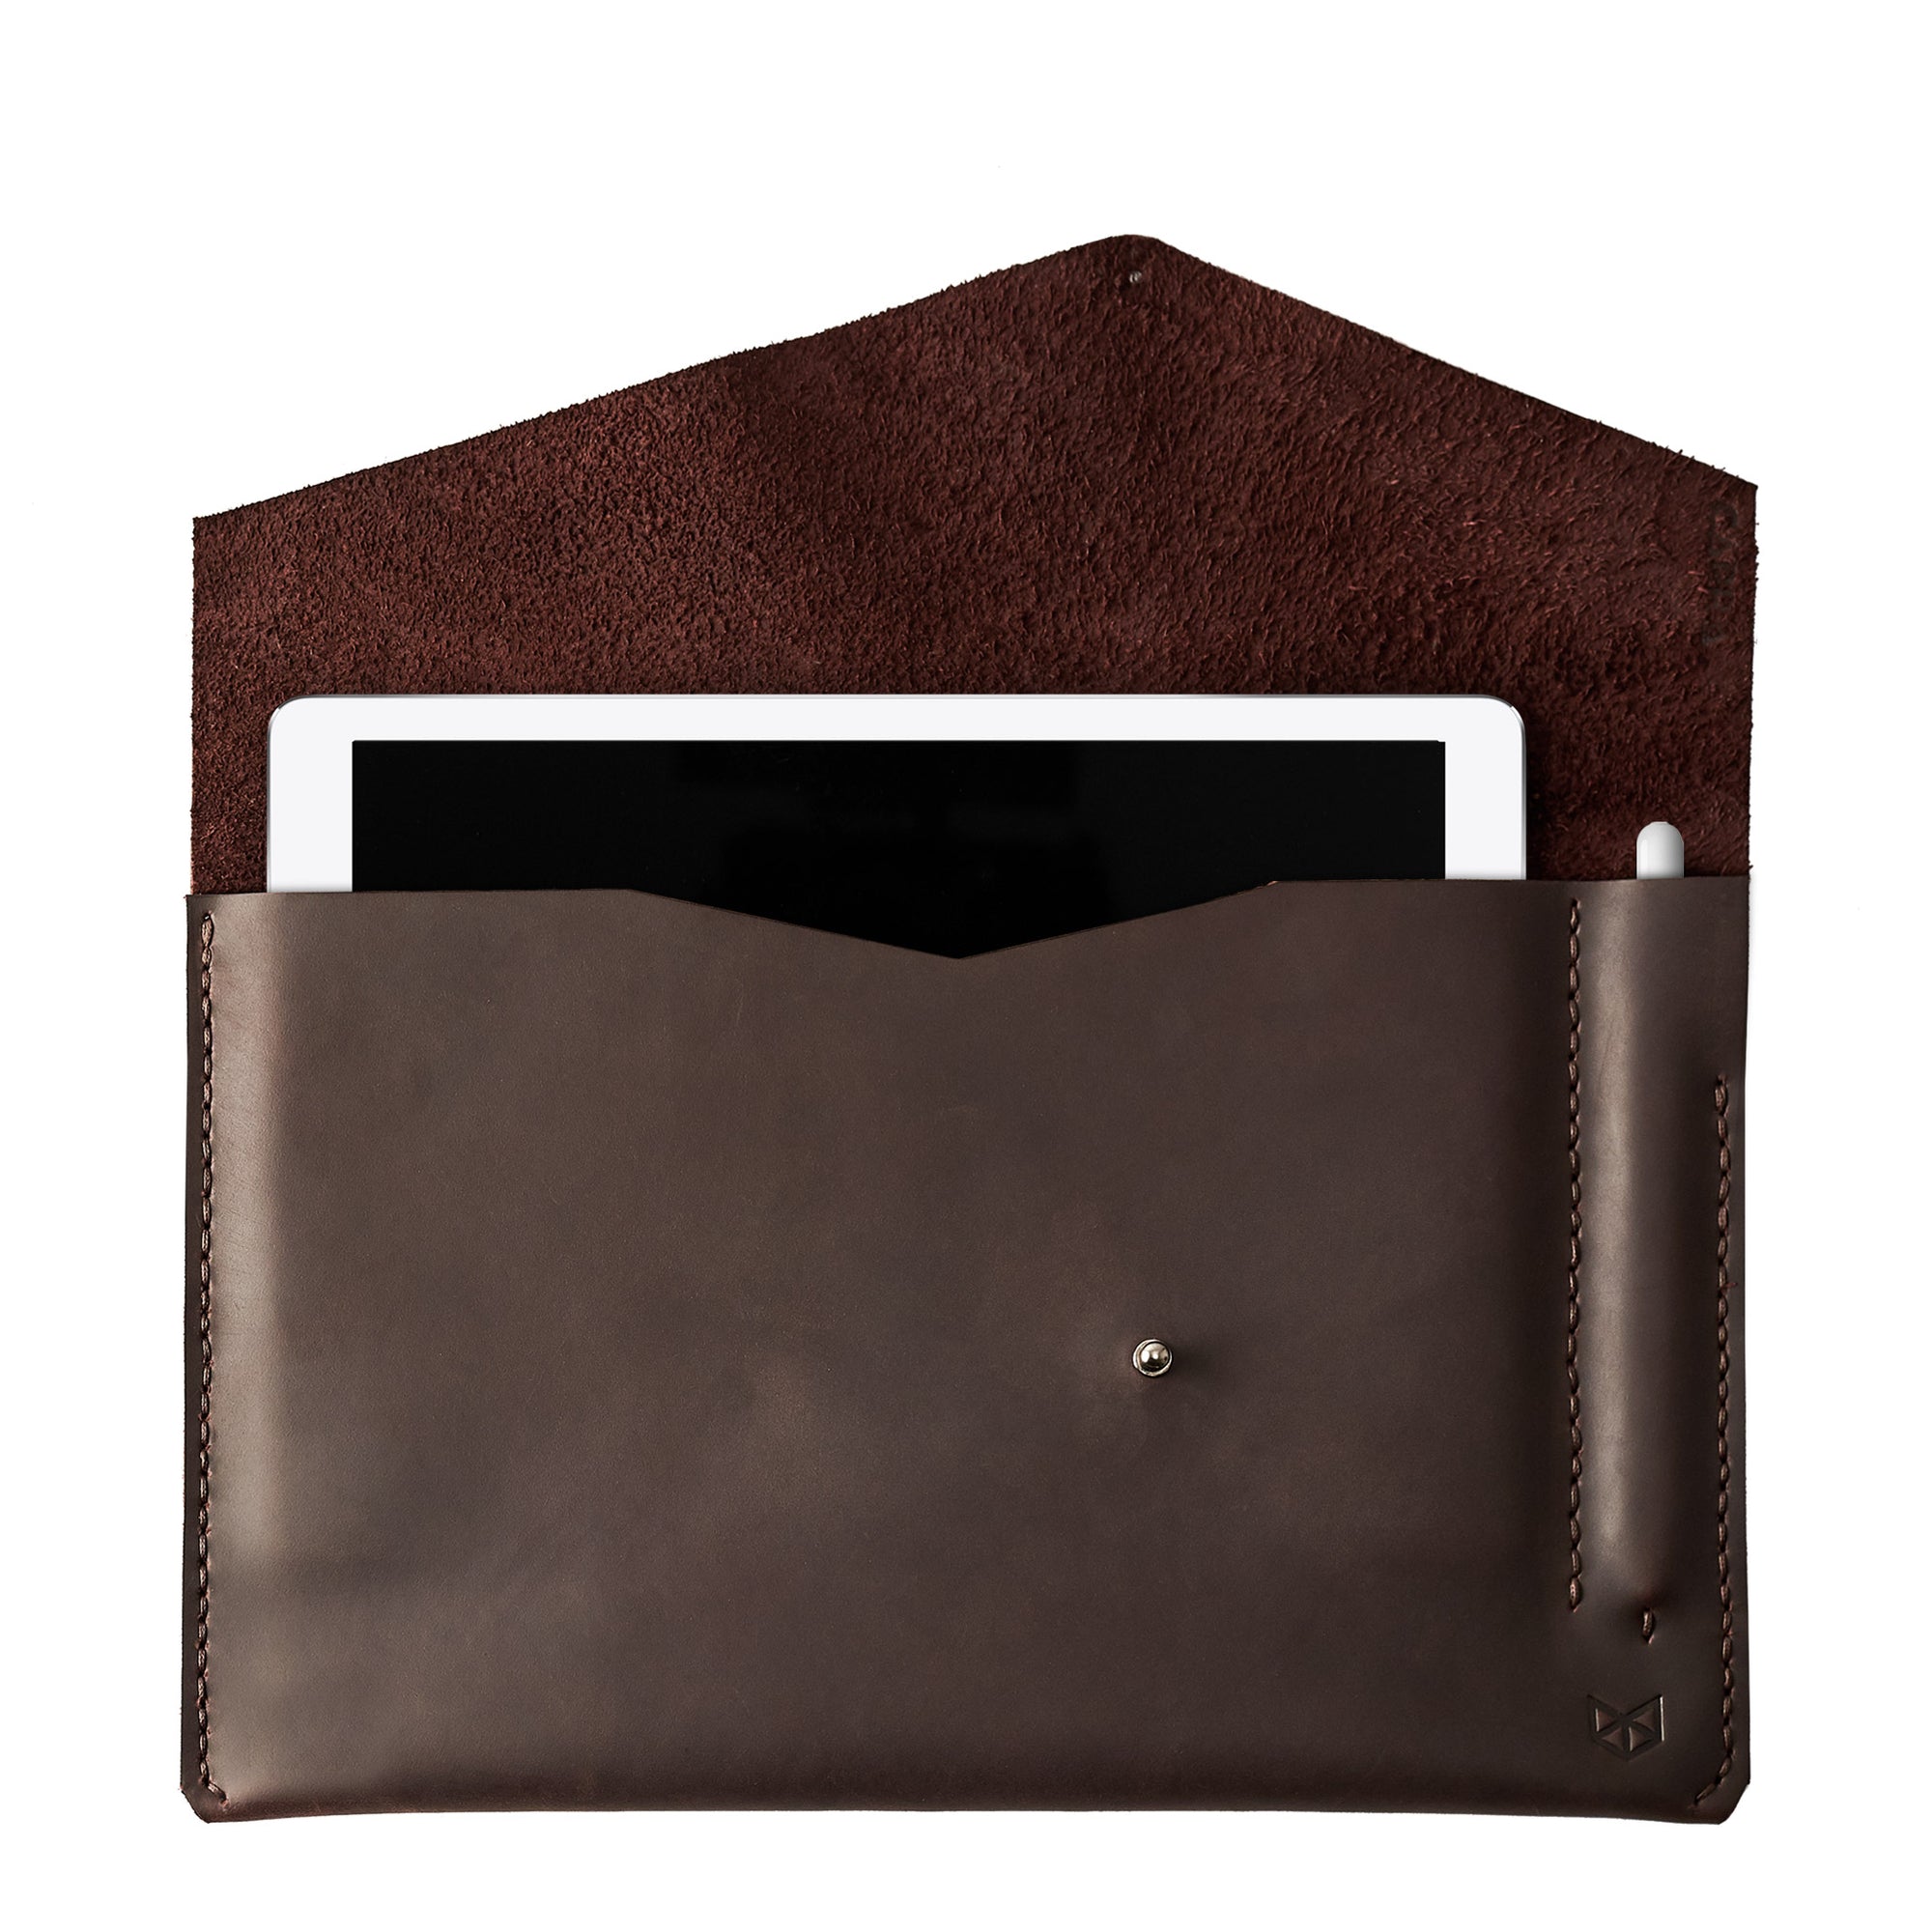 iPad Sleeve. iPad Leather Case Marron With Apple Pencil Holder by Capra Leather